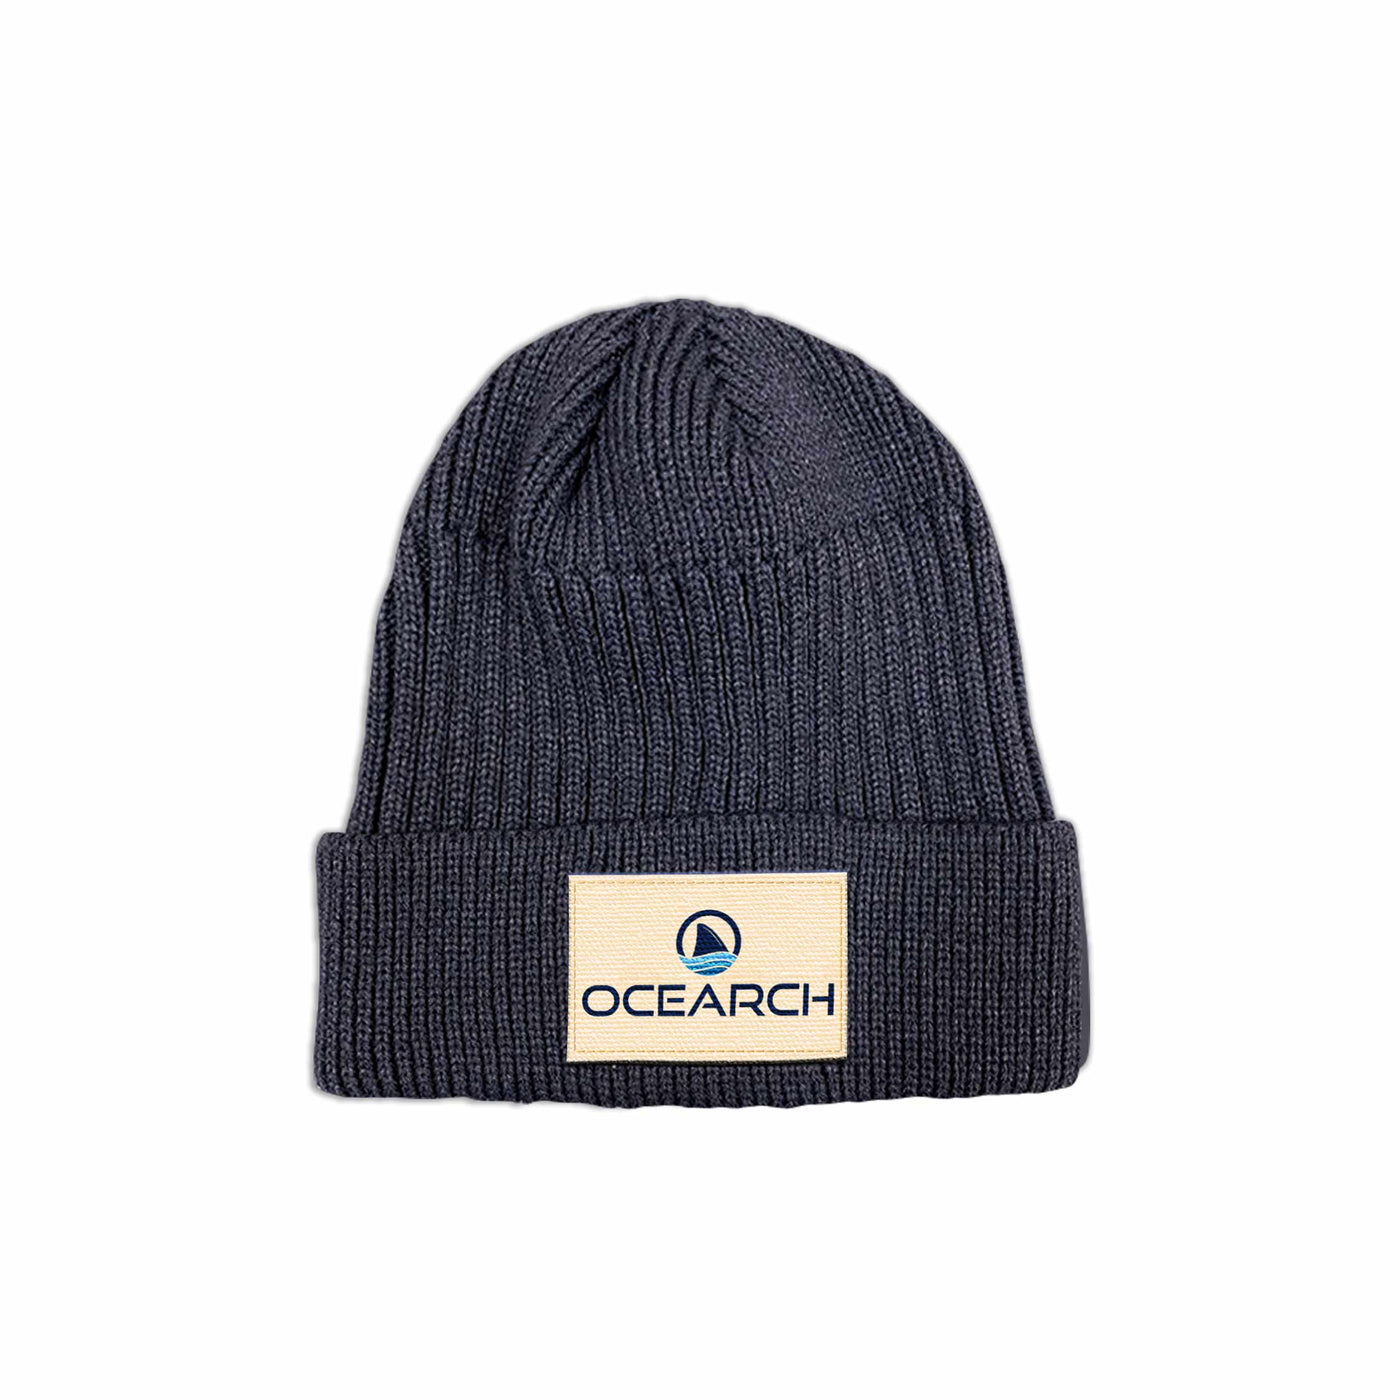 OCEARCH Crew Beanie | Official OCEARCH Store